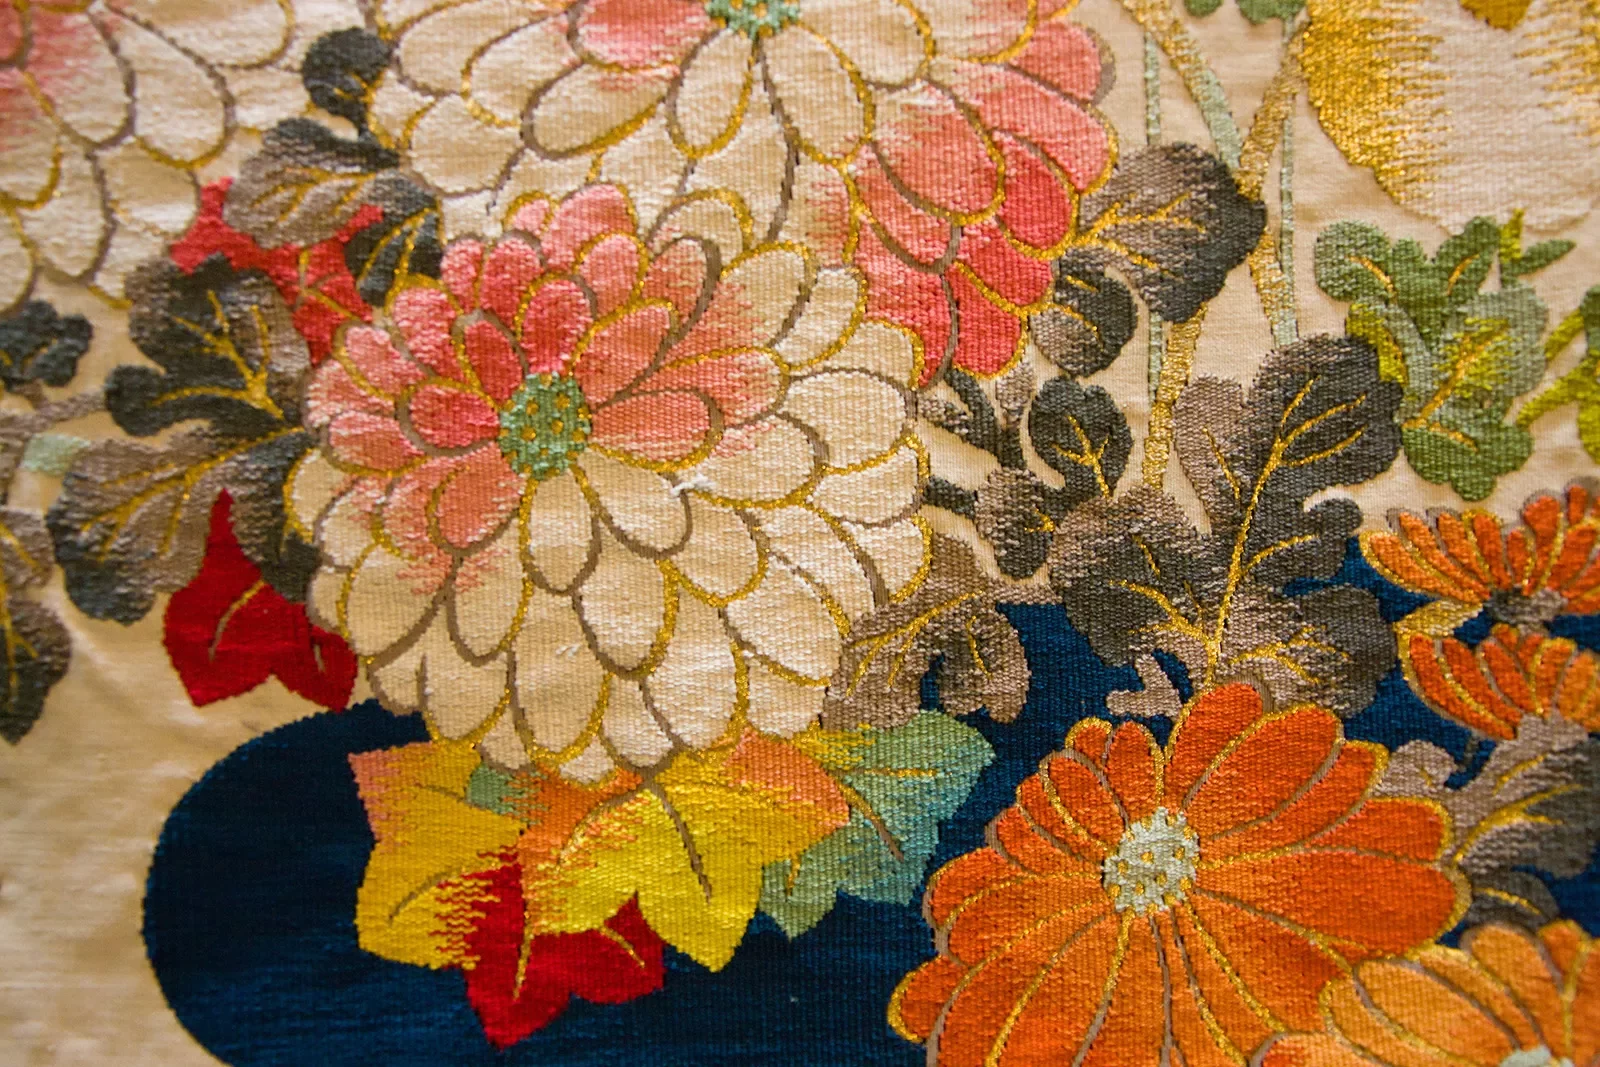 Detail of a painting of flowers done in a Japanese style